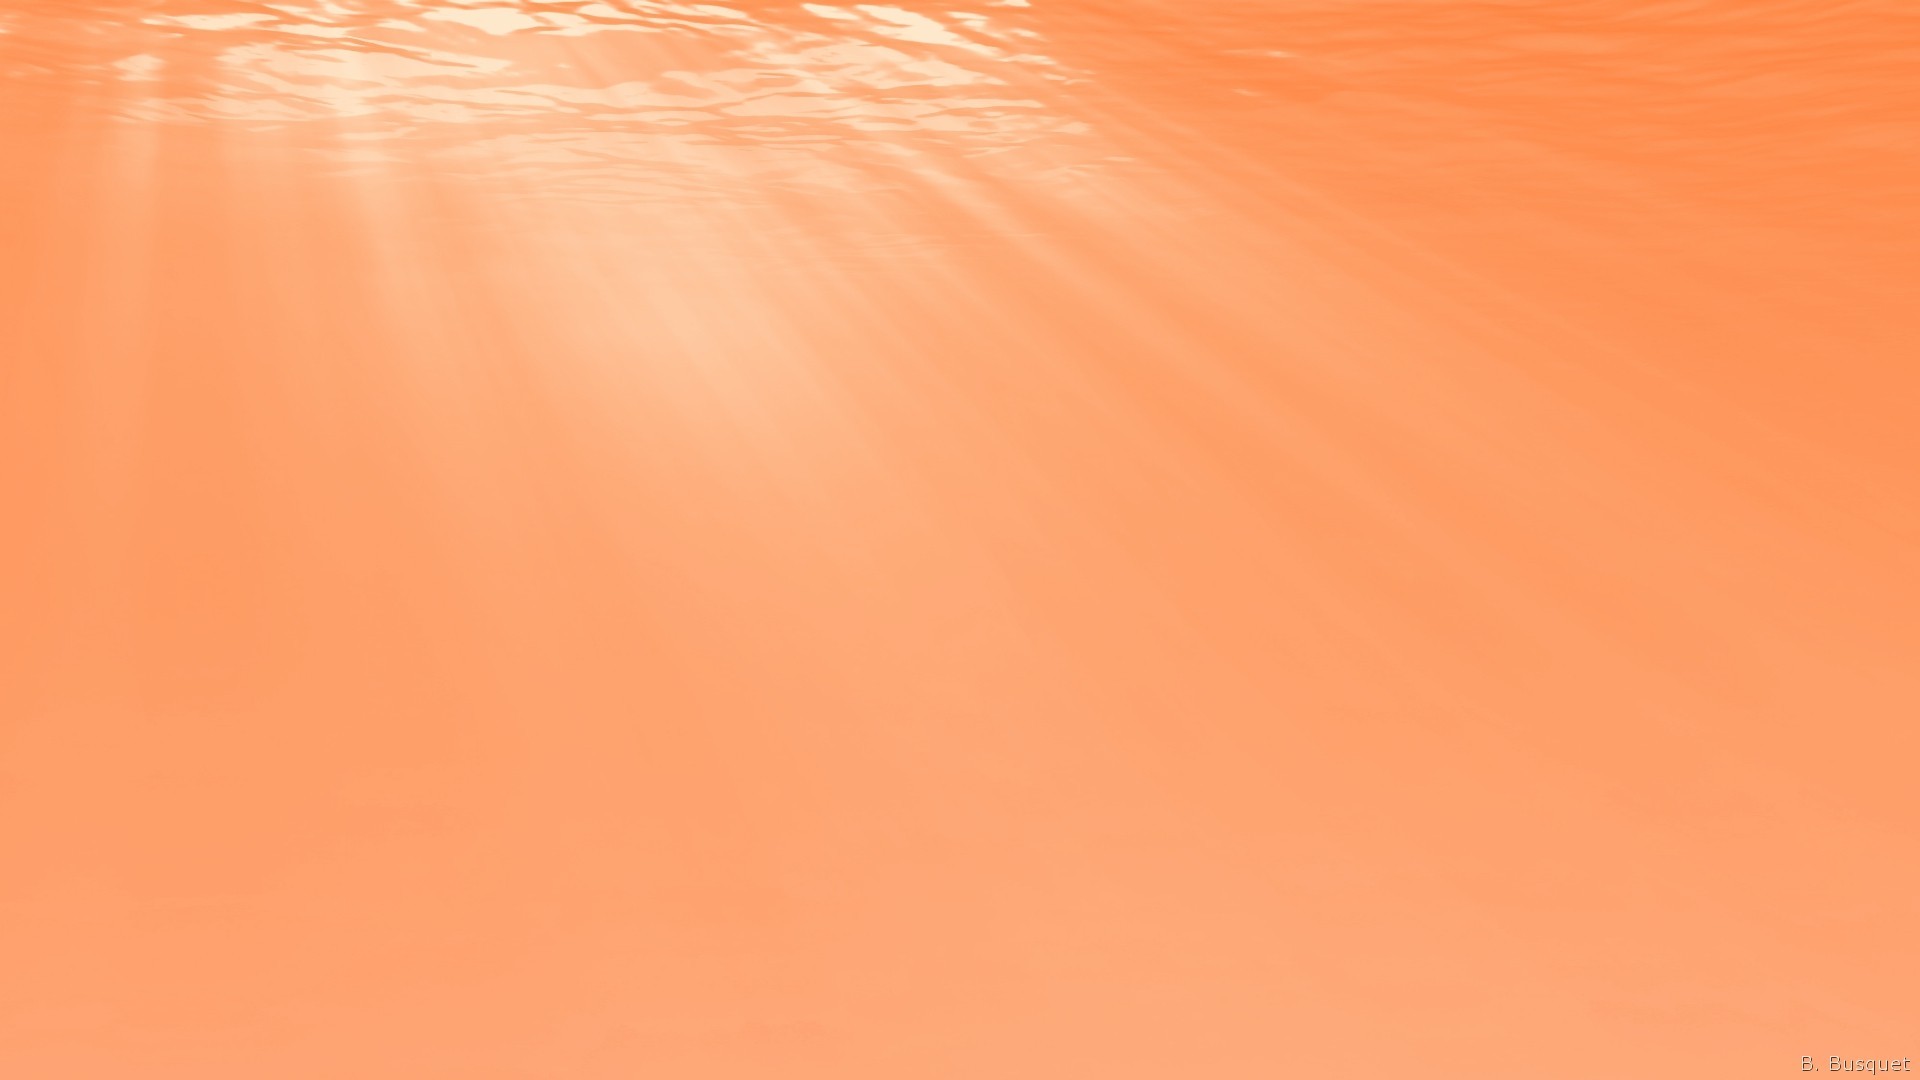 1920x1080 Orange wallpaper with light and water